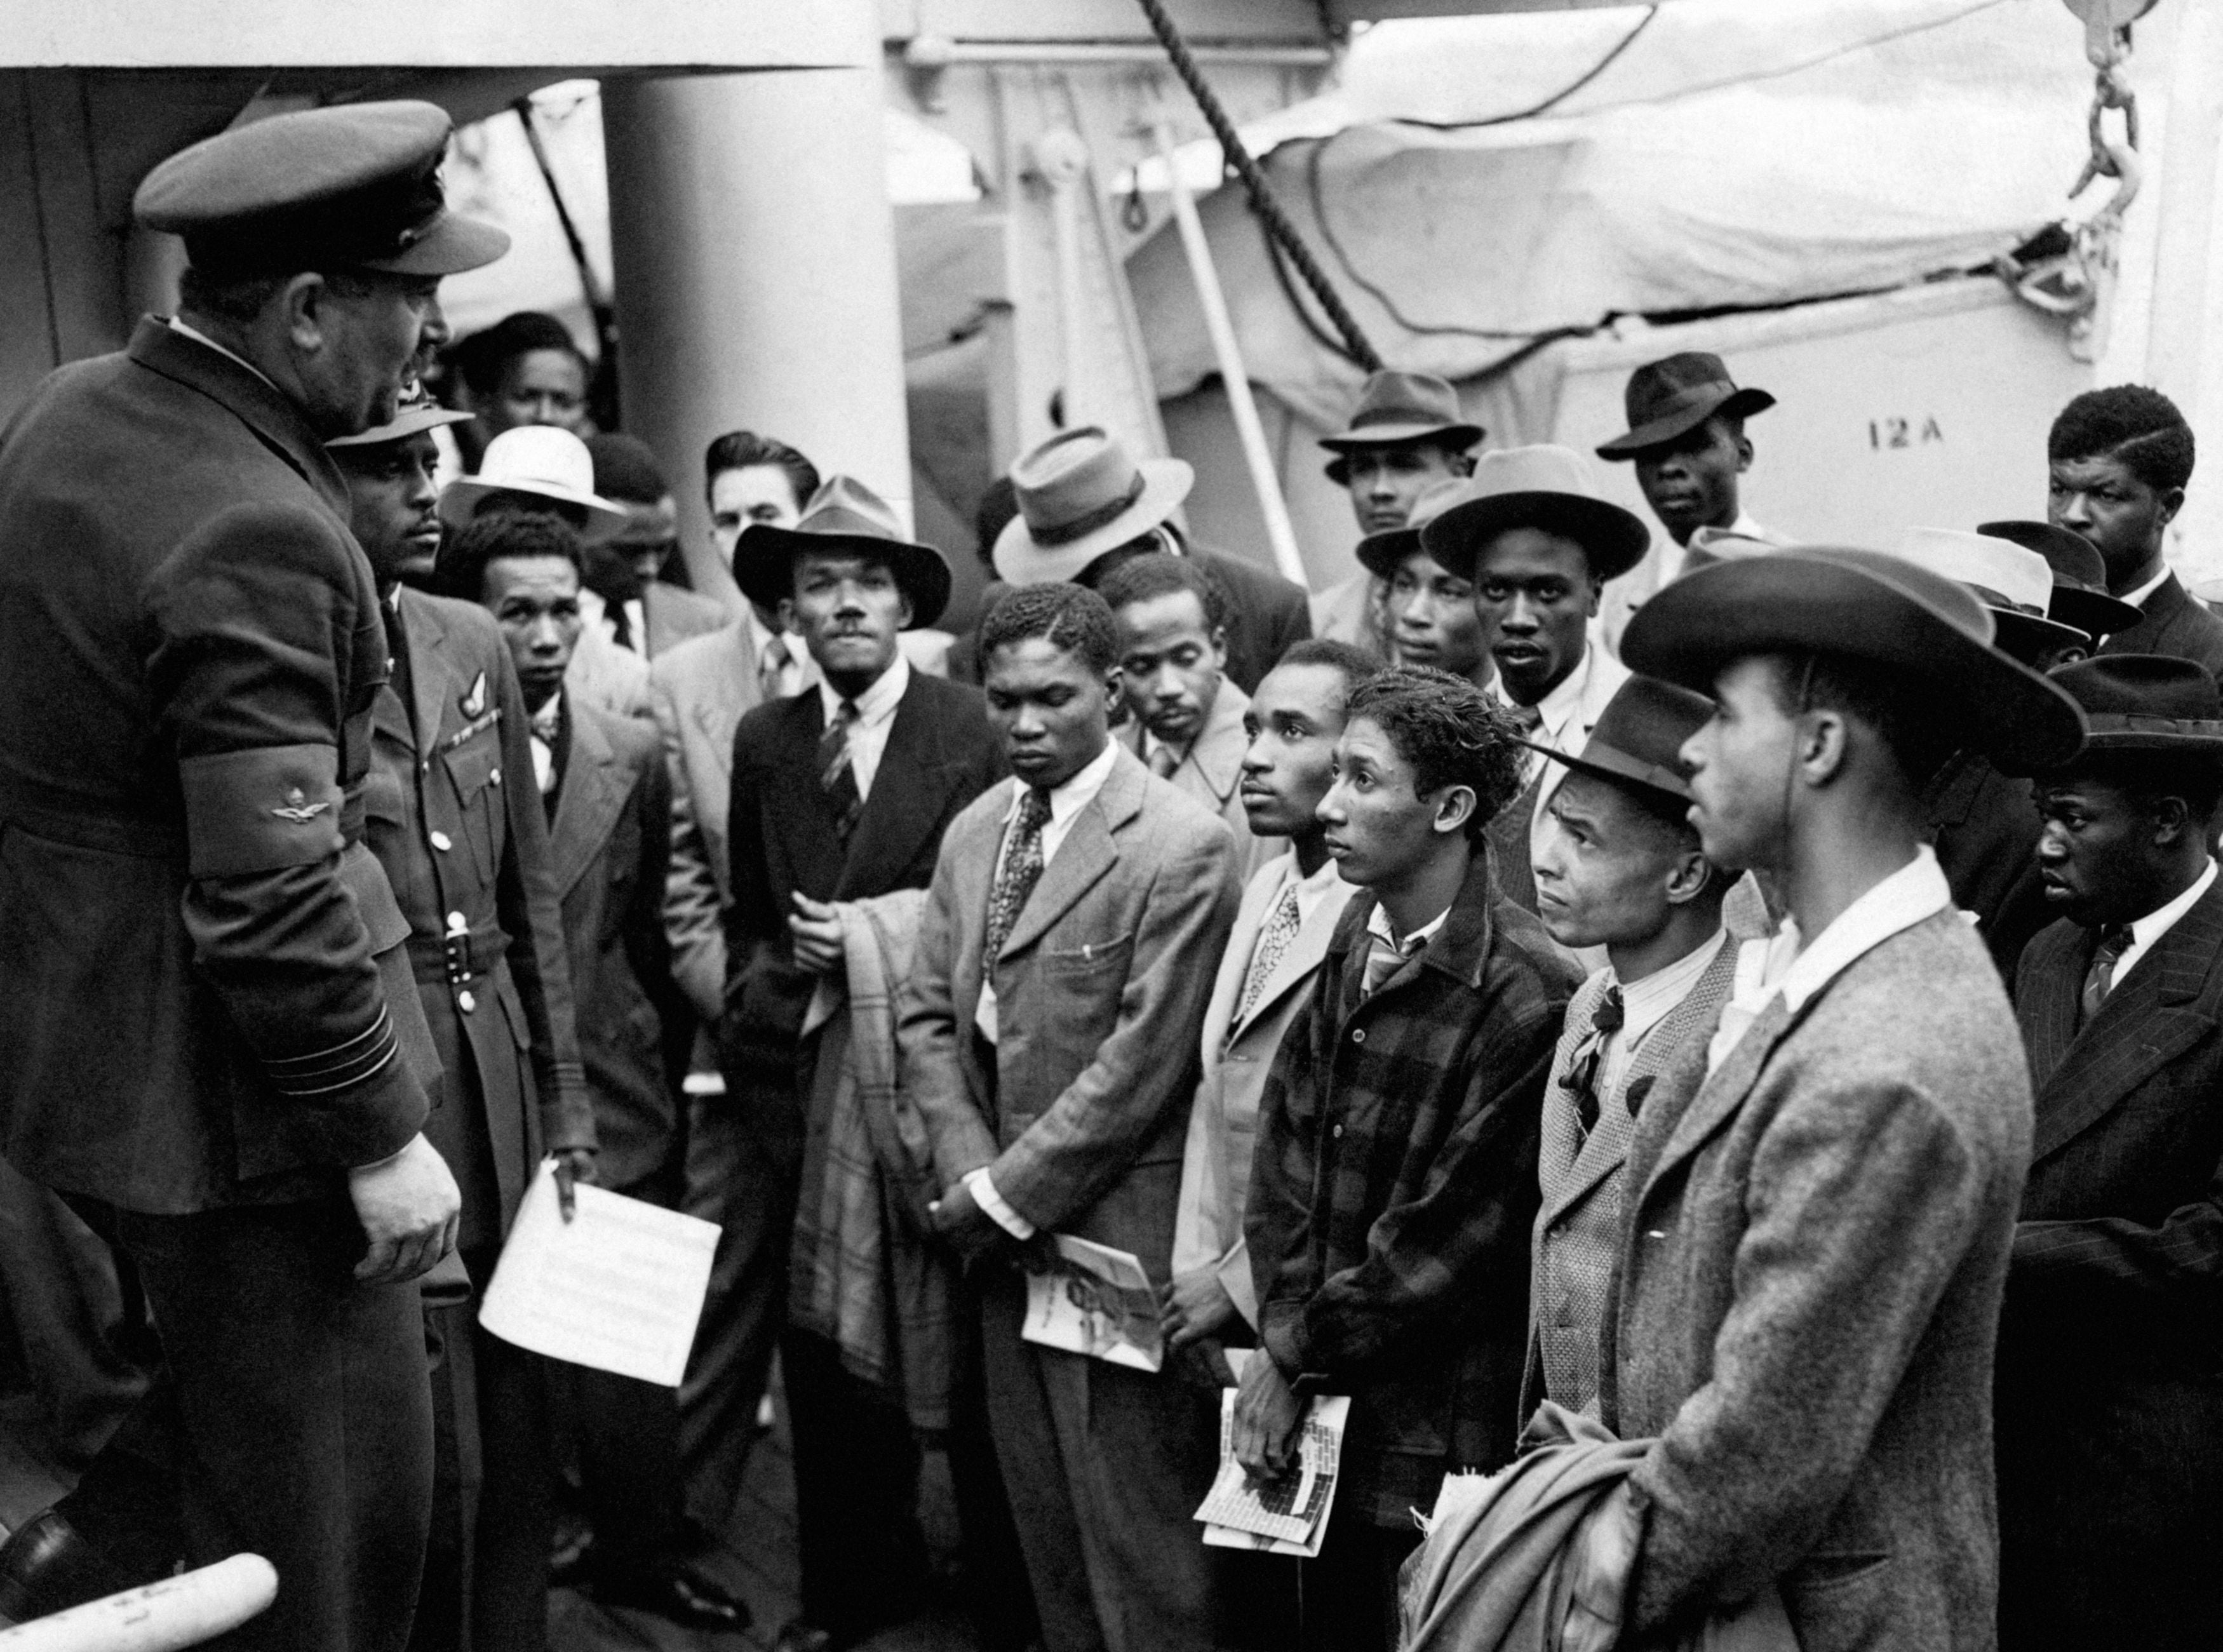 Jamaican immigrants welcomed by RAF officials from the Colonial Office after the ex-troopship HMT Empire Windrush landed them at Tilbury in 1948